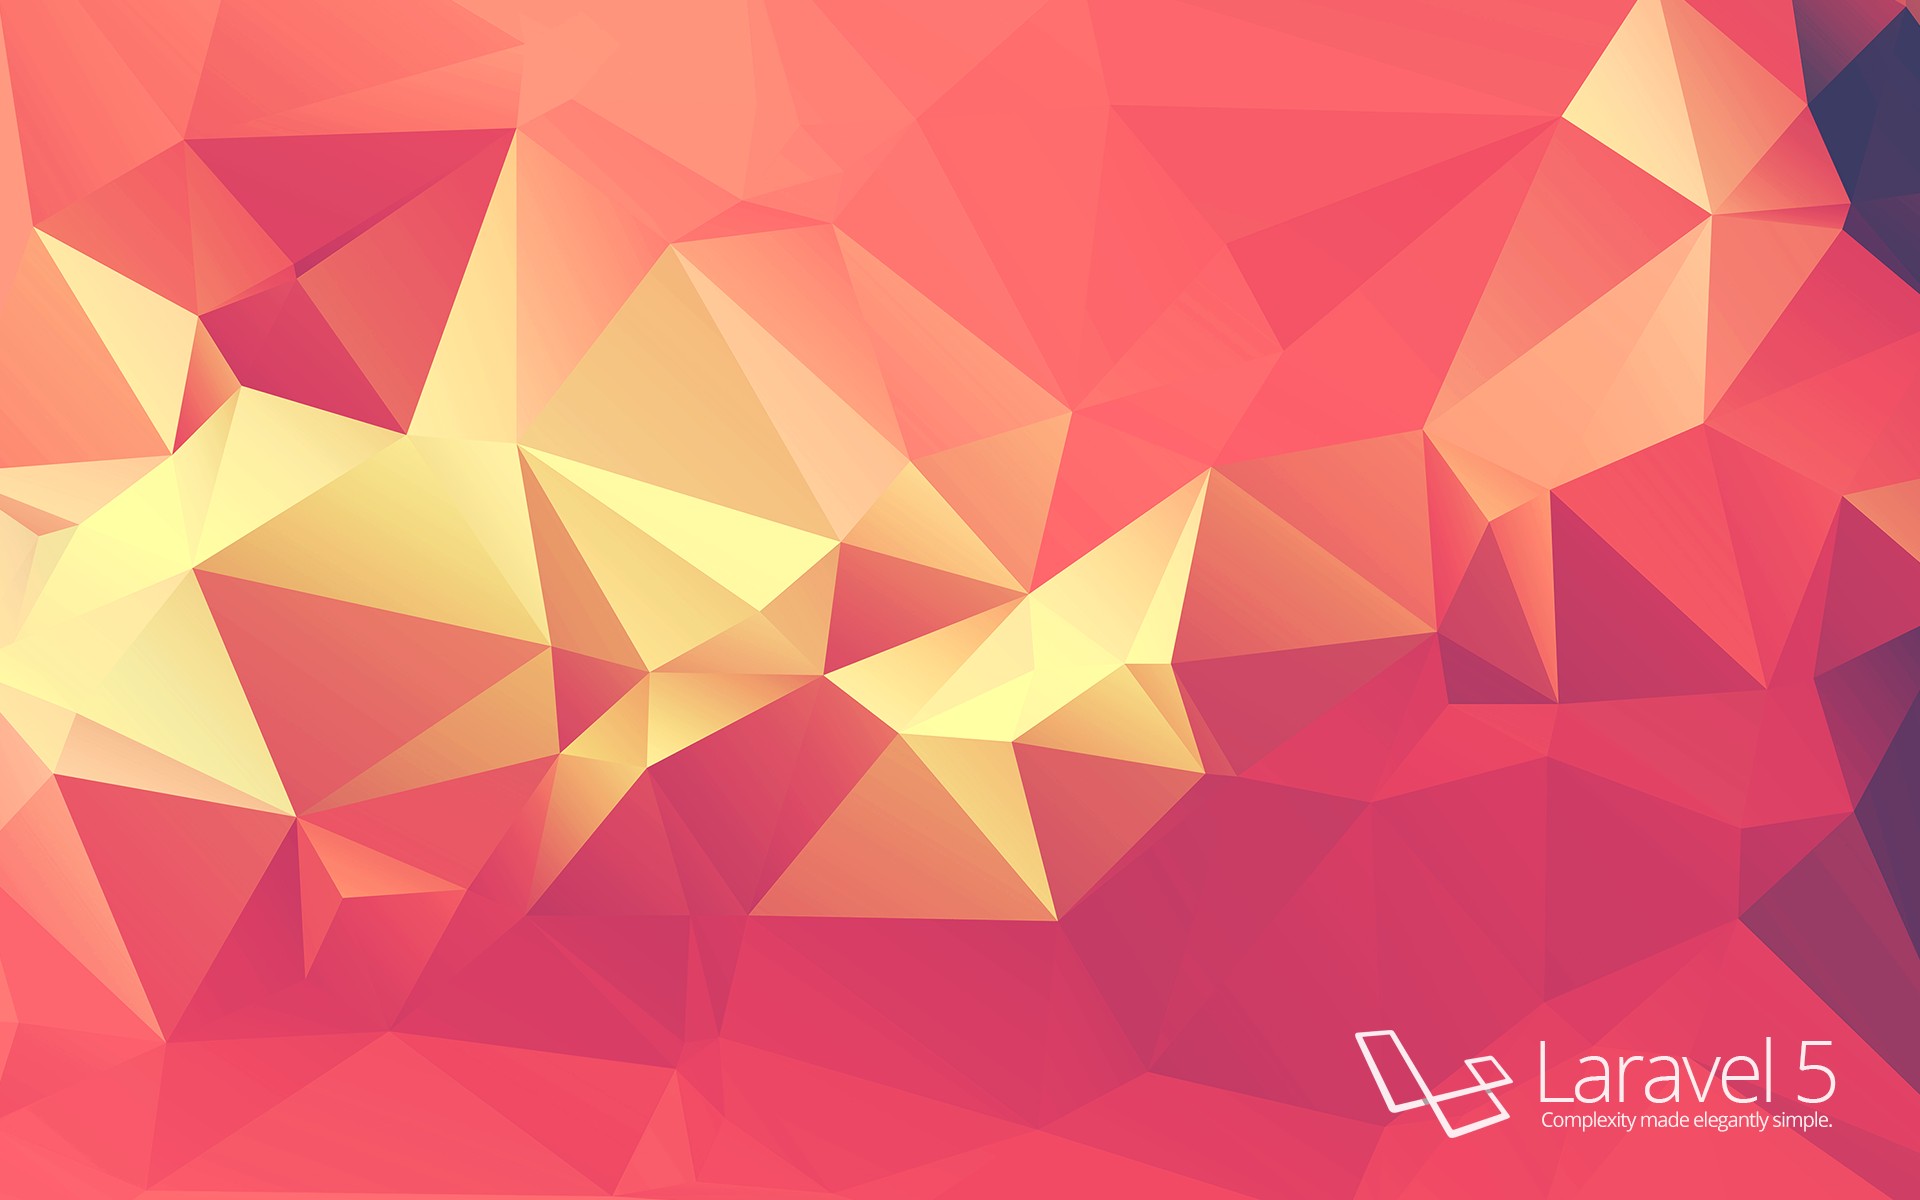 Laravel, Simple, Code, Programming, PHP, Low poly, Minimalism, Colorful Wallpaper